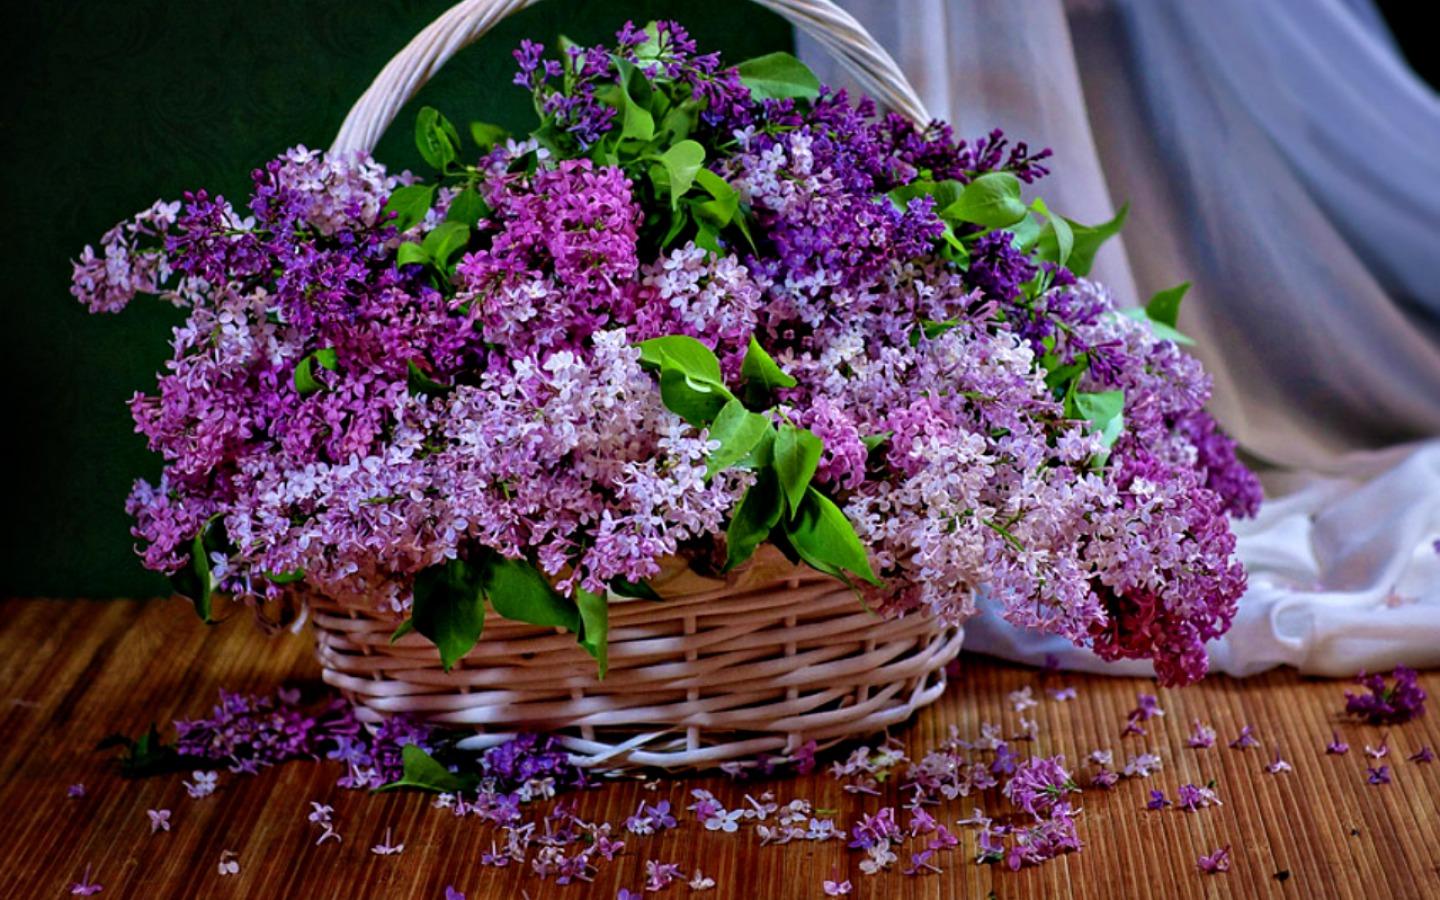 Basket of Lilacs Wallpaper and Background Imagex900